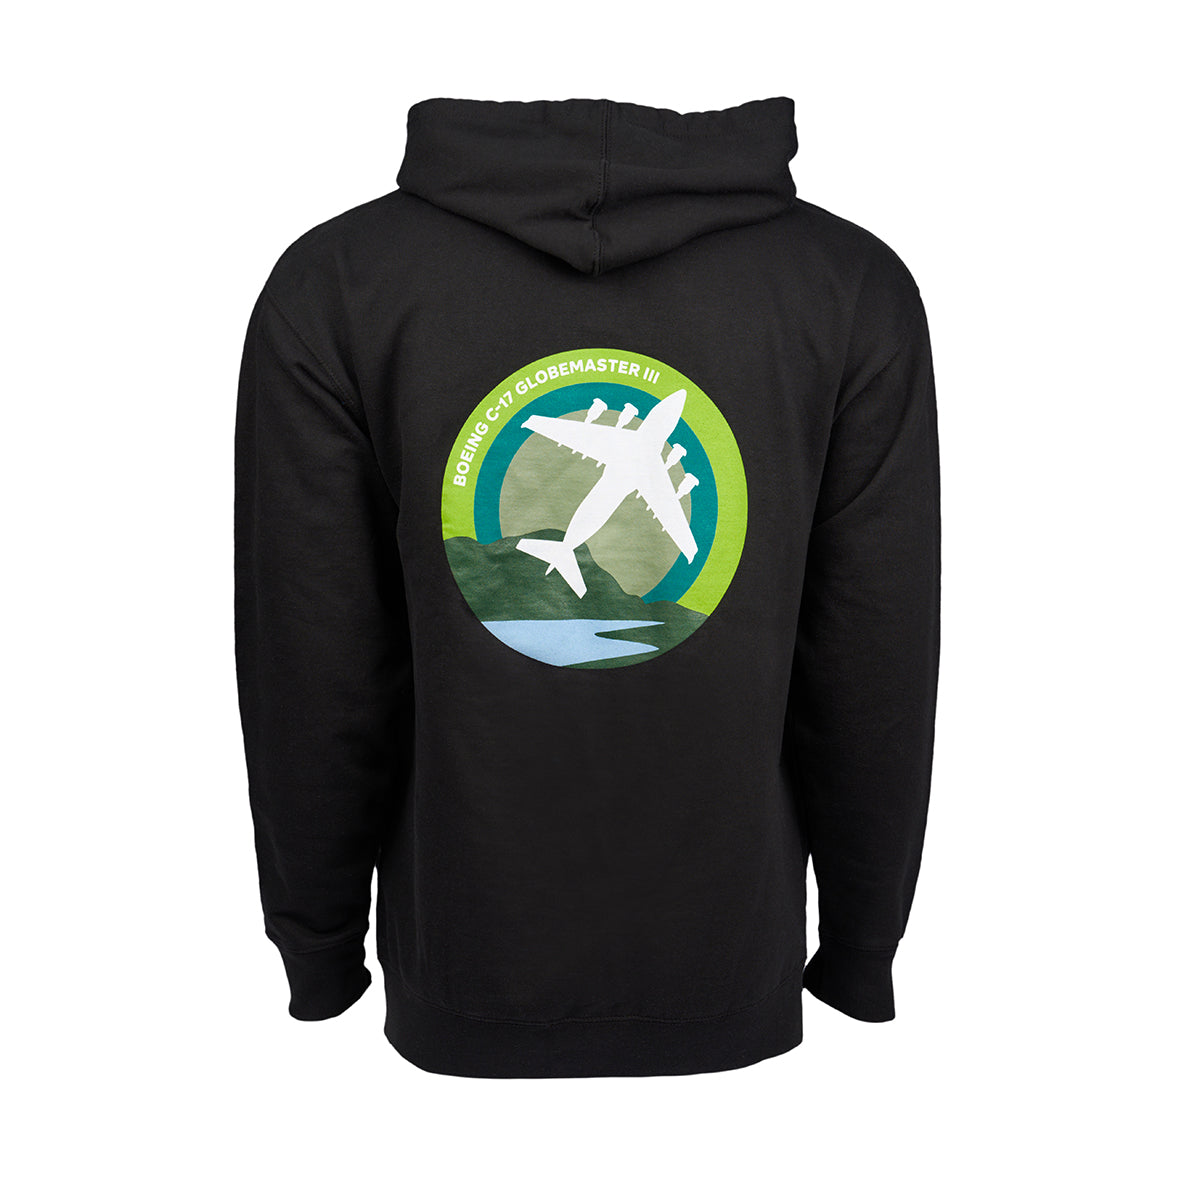 Full product image of the back side of the hooded sweatshirt in a black color.  Showing the Skyward graphic of the Boeing C-17 Globemaster.